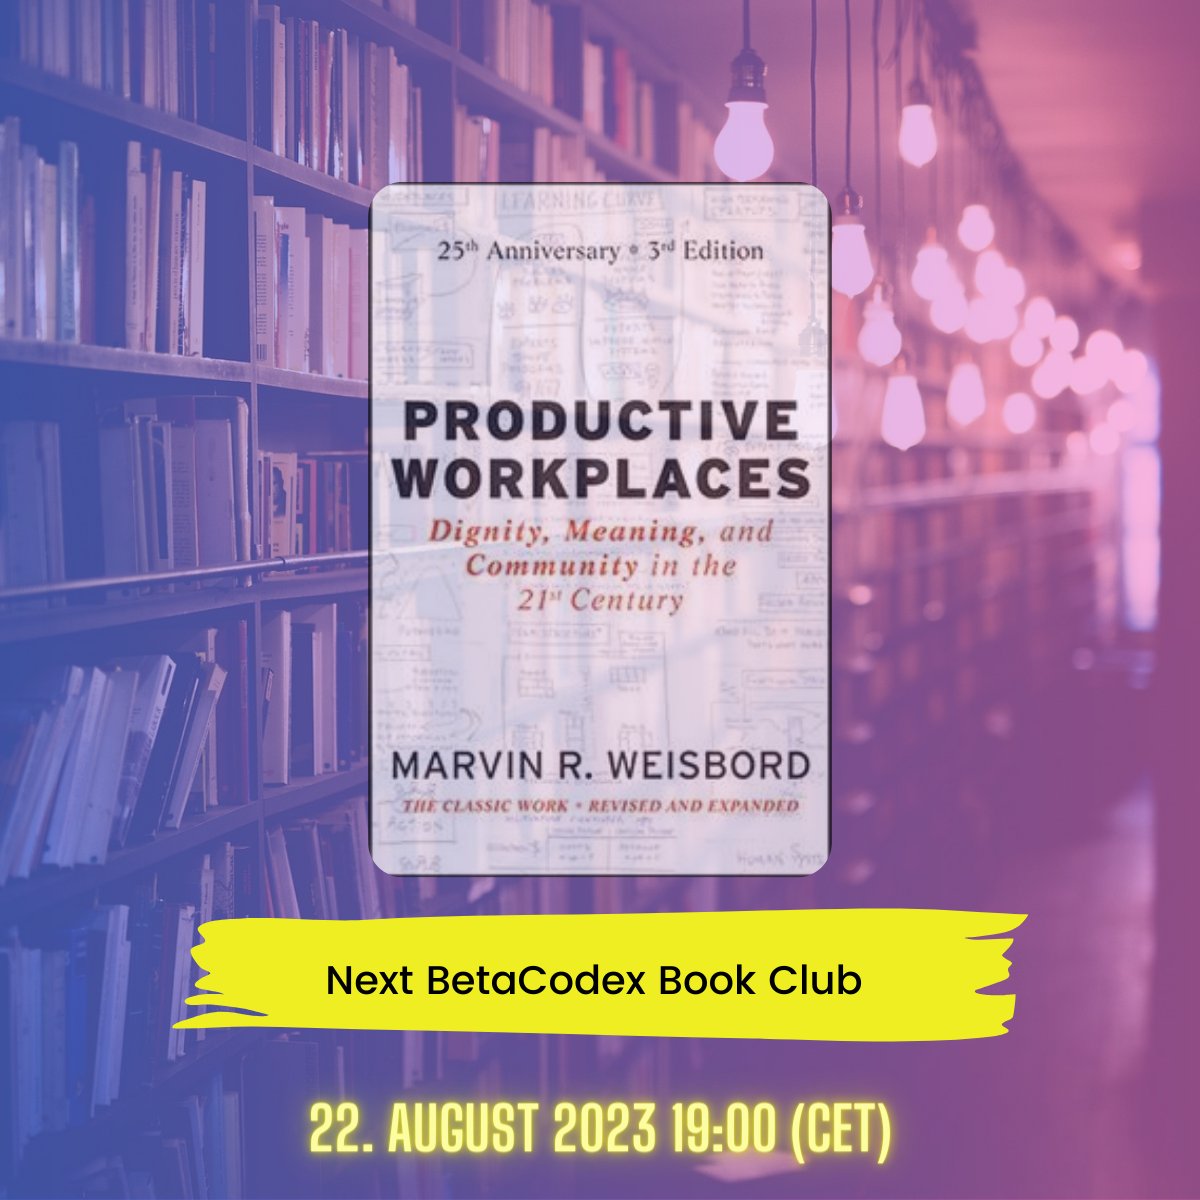 Peer Learning is such a wonderful and powerful way of learning. The BetaCodex BookClub is one of those opportunities to experience Peer Learning!

linkedin.com/feed/update/ur…
#BetaCodexBookClub #PeerLearning #workplace #leadership #management